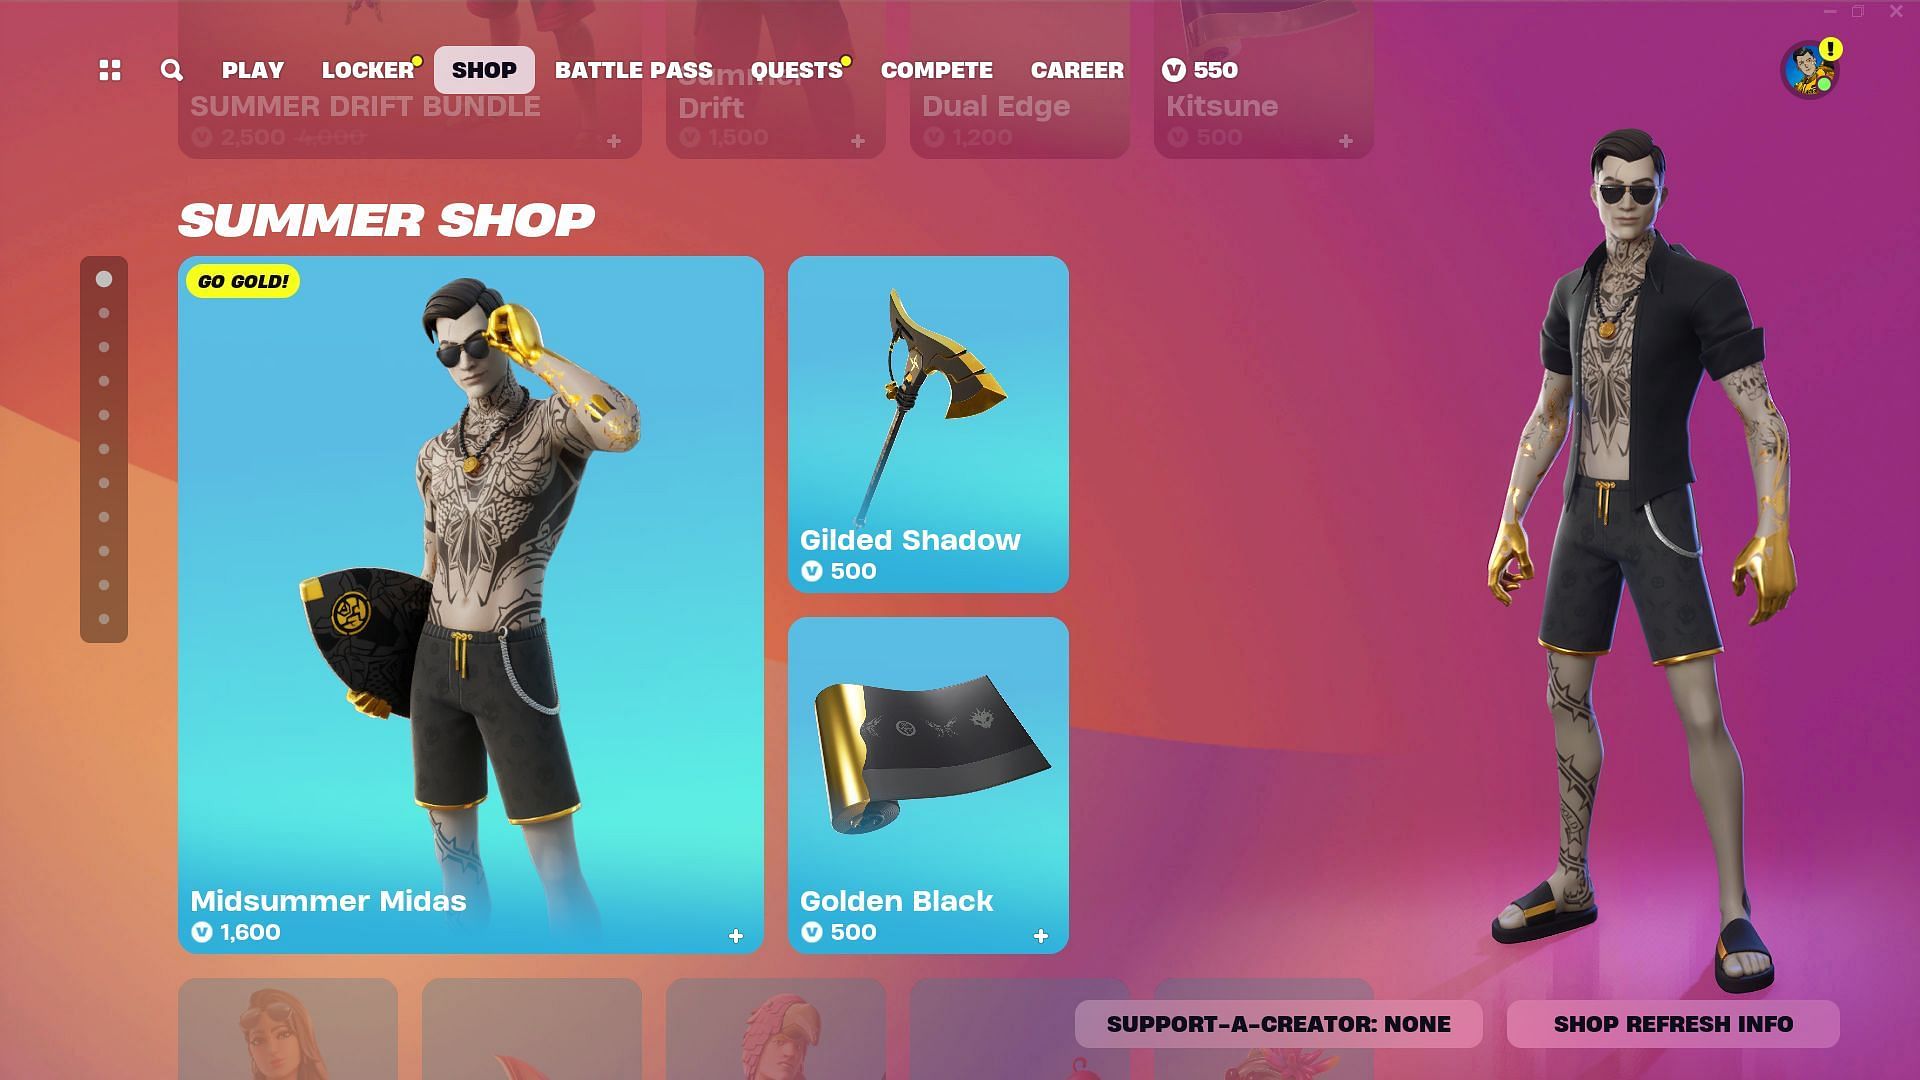 You can now purchase Midsummer Midas skin in Fortnite (Image via Epic Games)